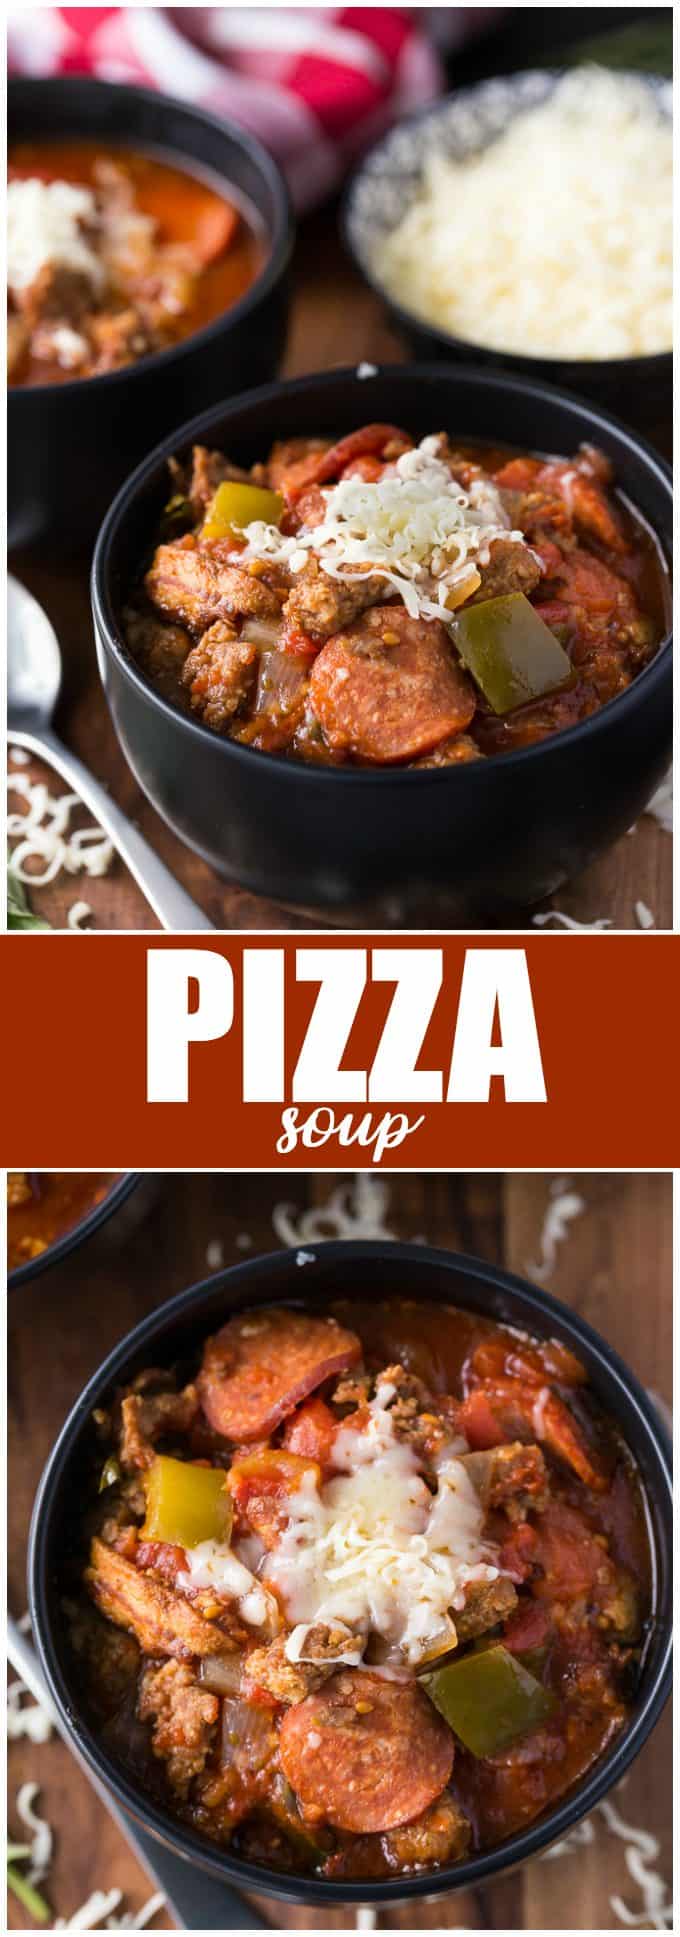 Pizza Soup - The best supreme pizza in a bowl! The heartiest slow cooker soup recipe packed with pepperoni, Italian sausage, and bacon with a tomato base and tons of veggies and cheese.